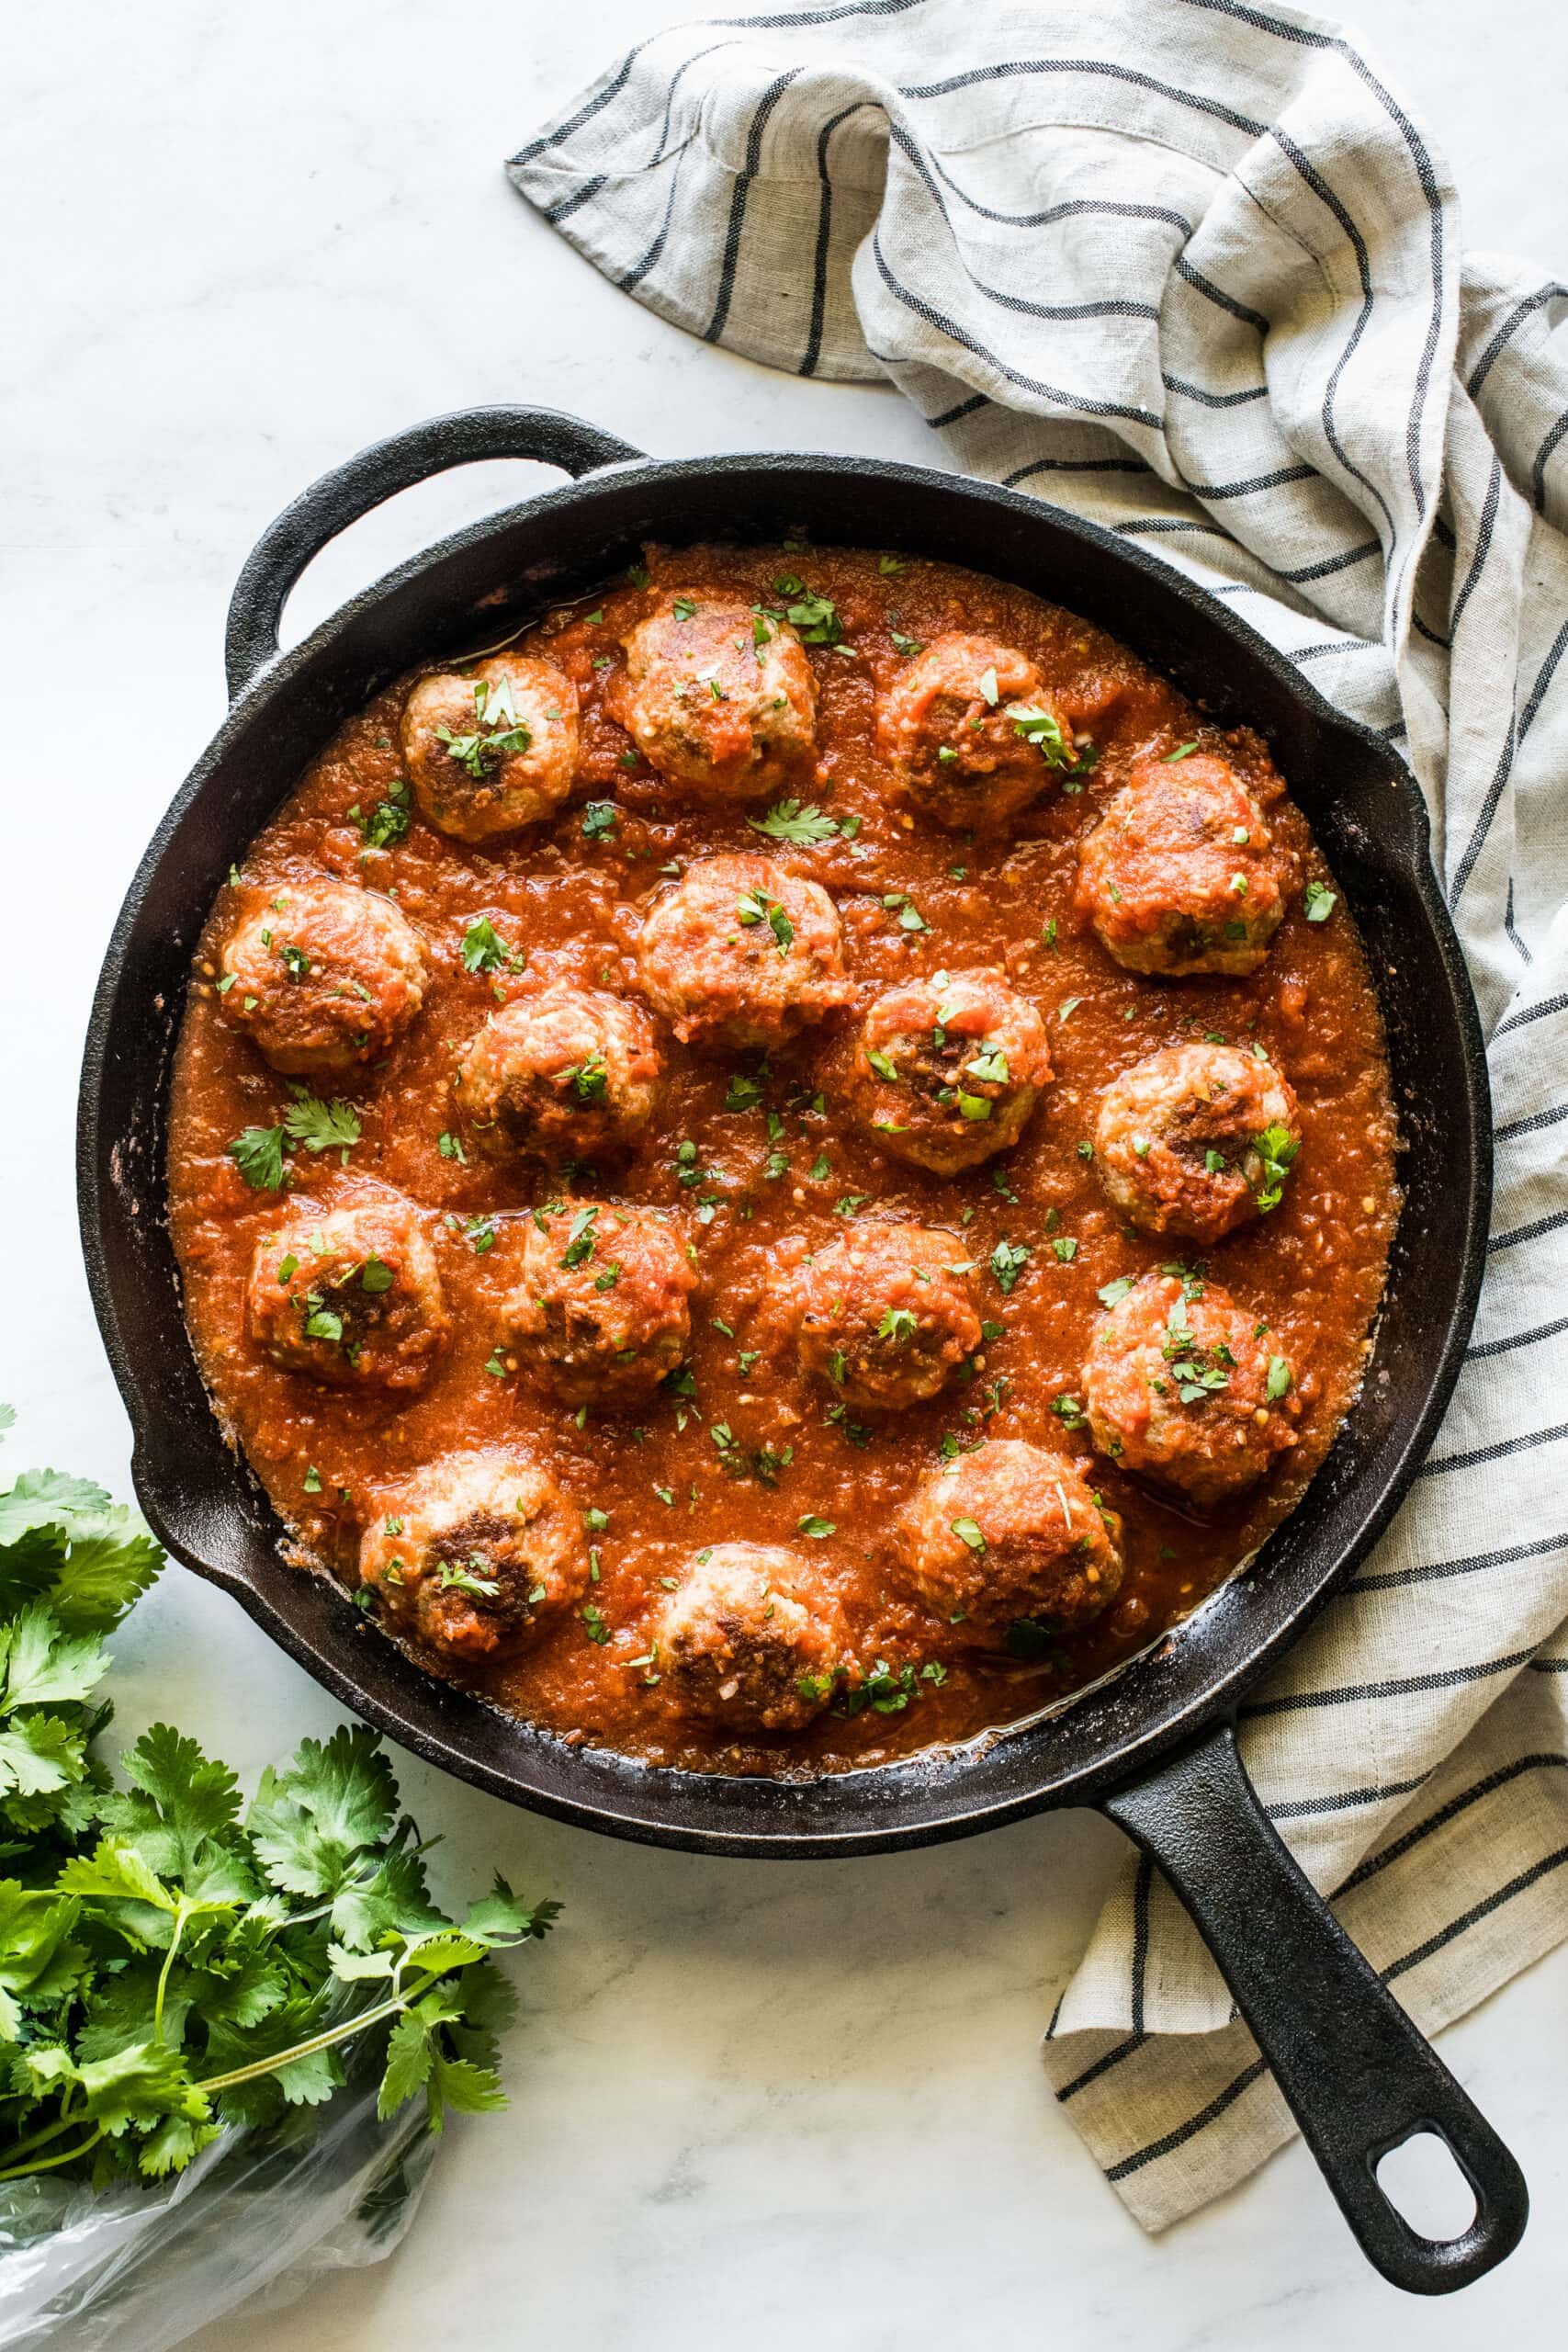 Mexican meatballs made from pork in a cast iron skillet.